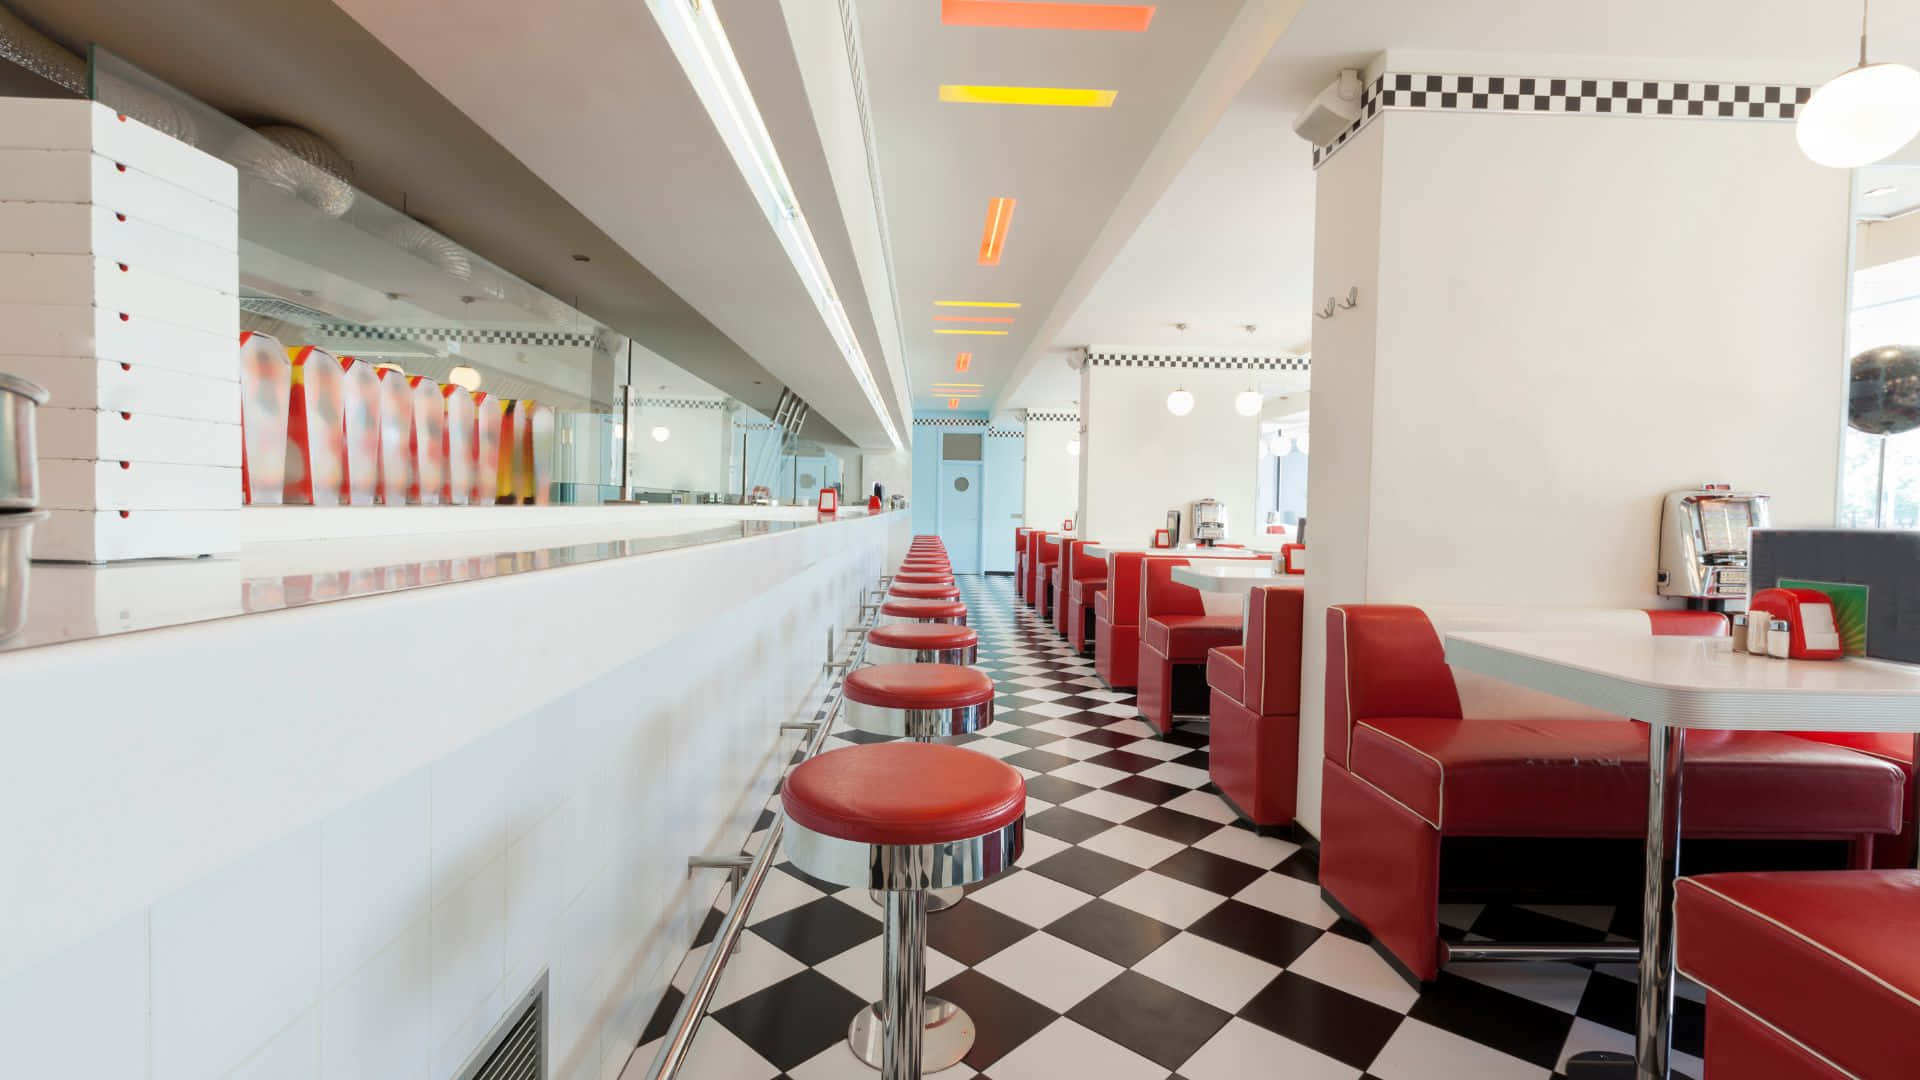 Retro-style diner offering a cozy dining experience